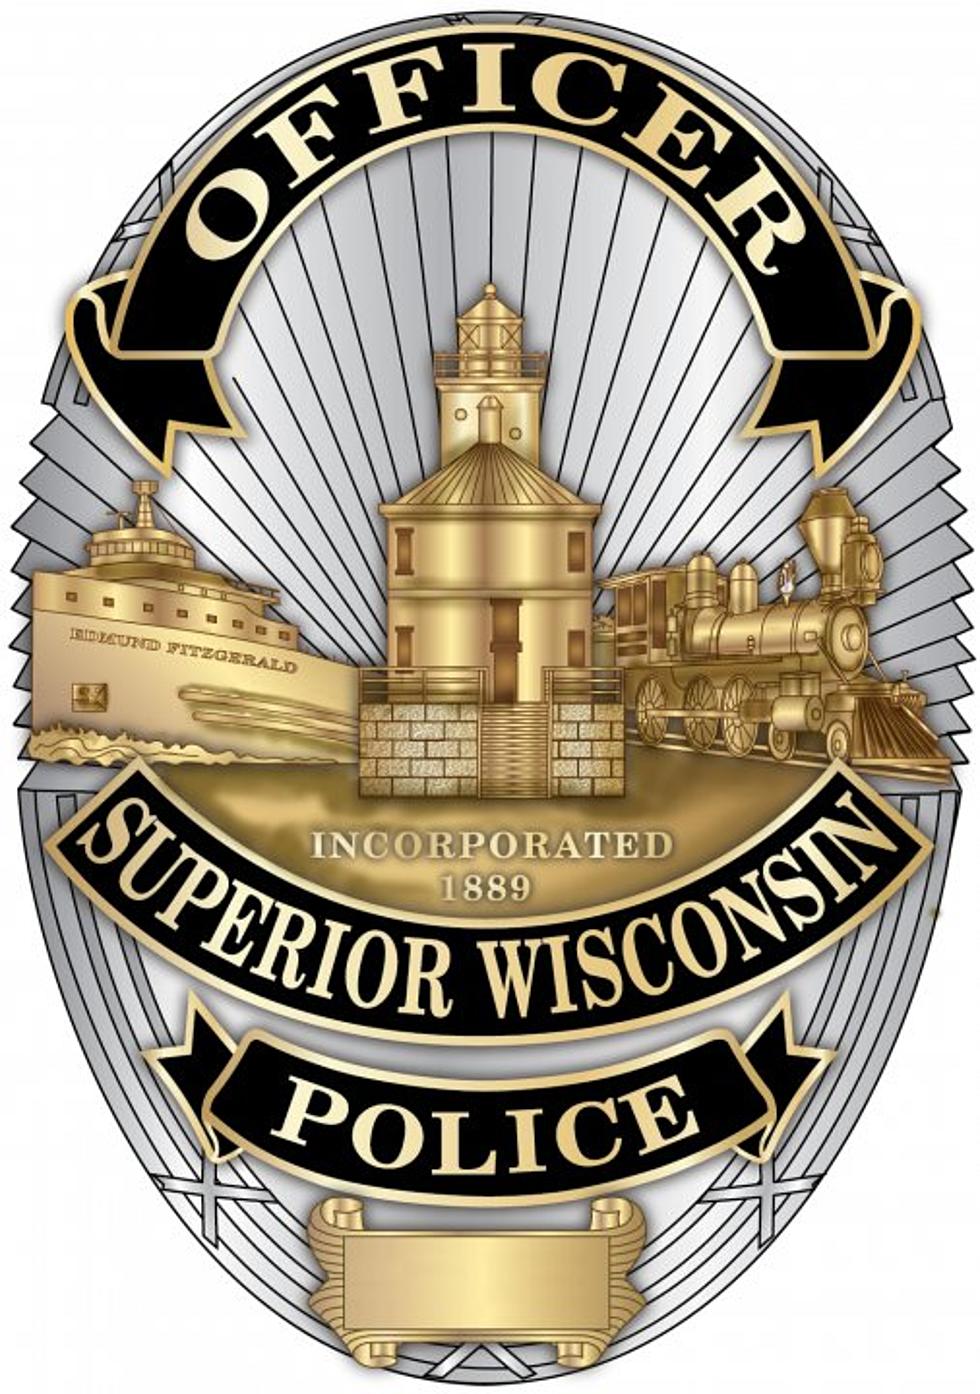 Superior Police Department’s Coffee With A Cop Happening This Wednesday March 6th